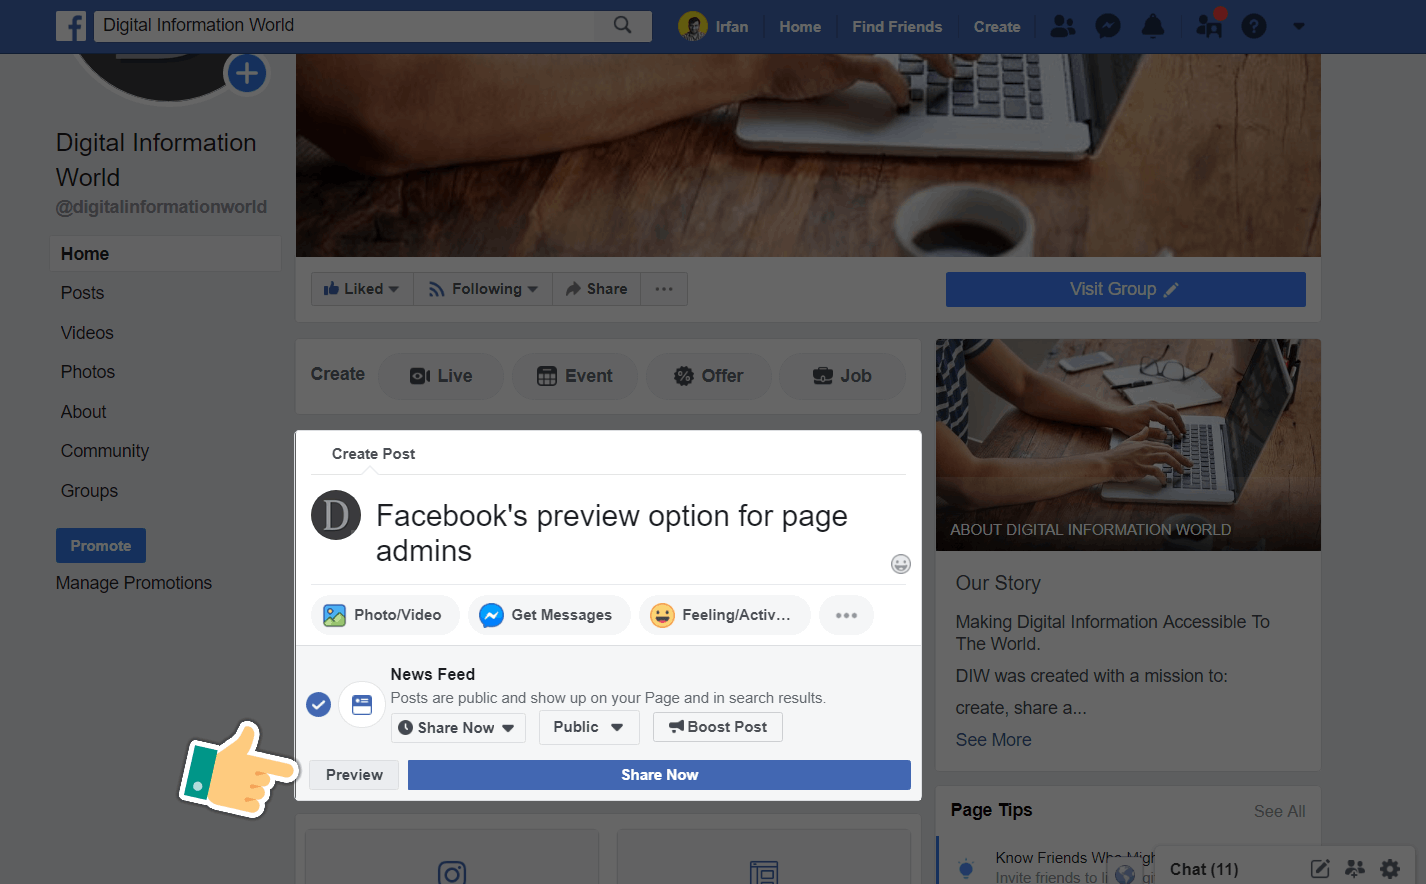 Facebook Finally Rolls out a "Preview" Option for Page Posts! Source: https://twitter.com/MattNavarra/status/1163806897742286849